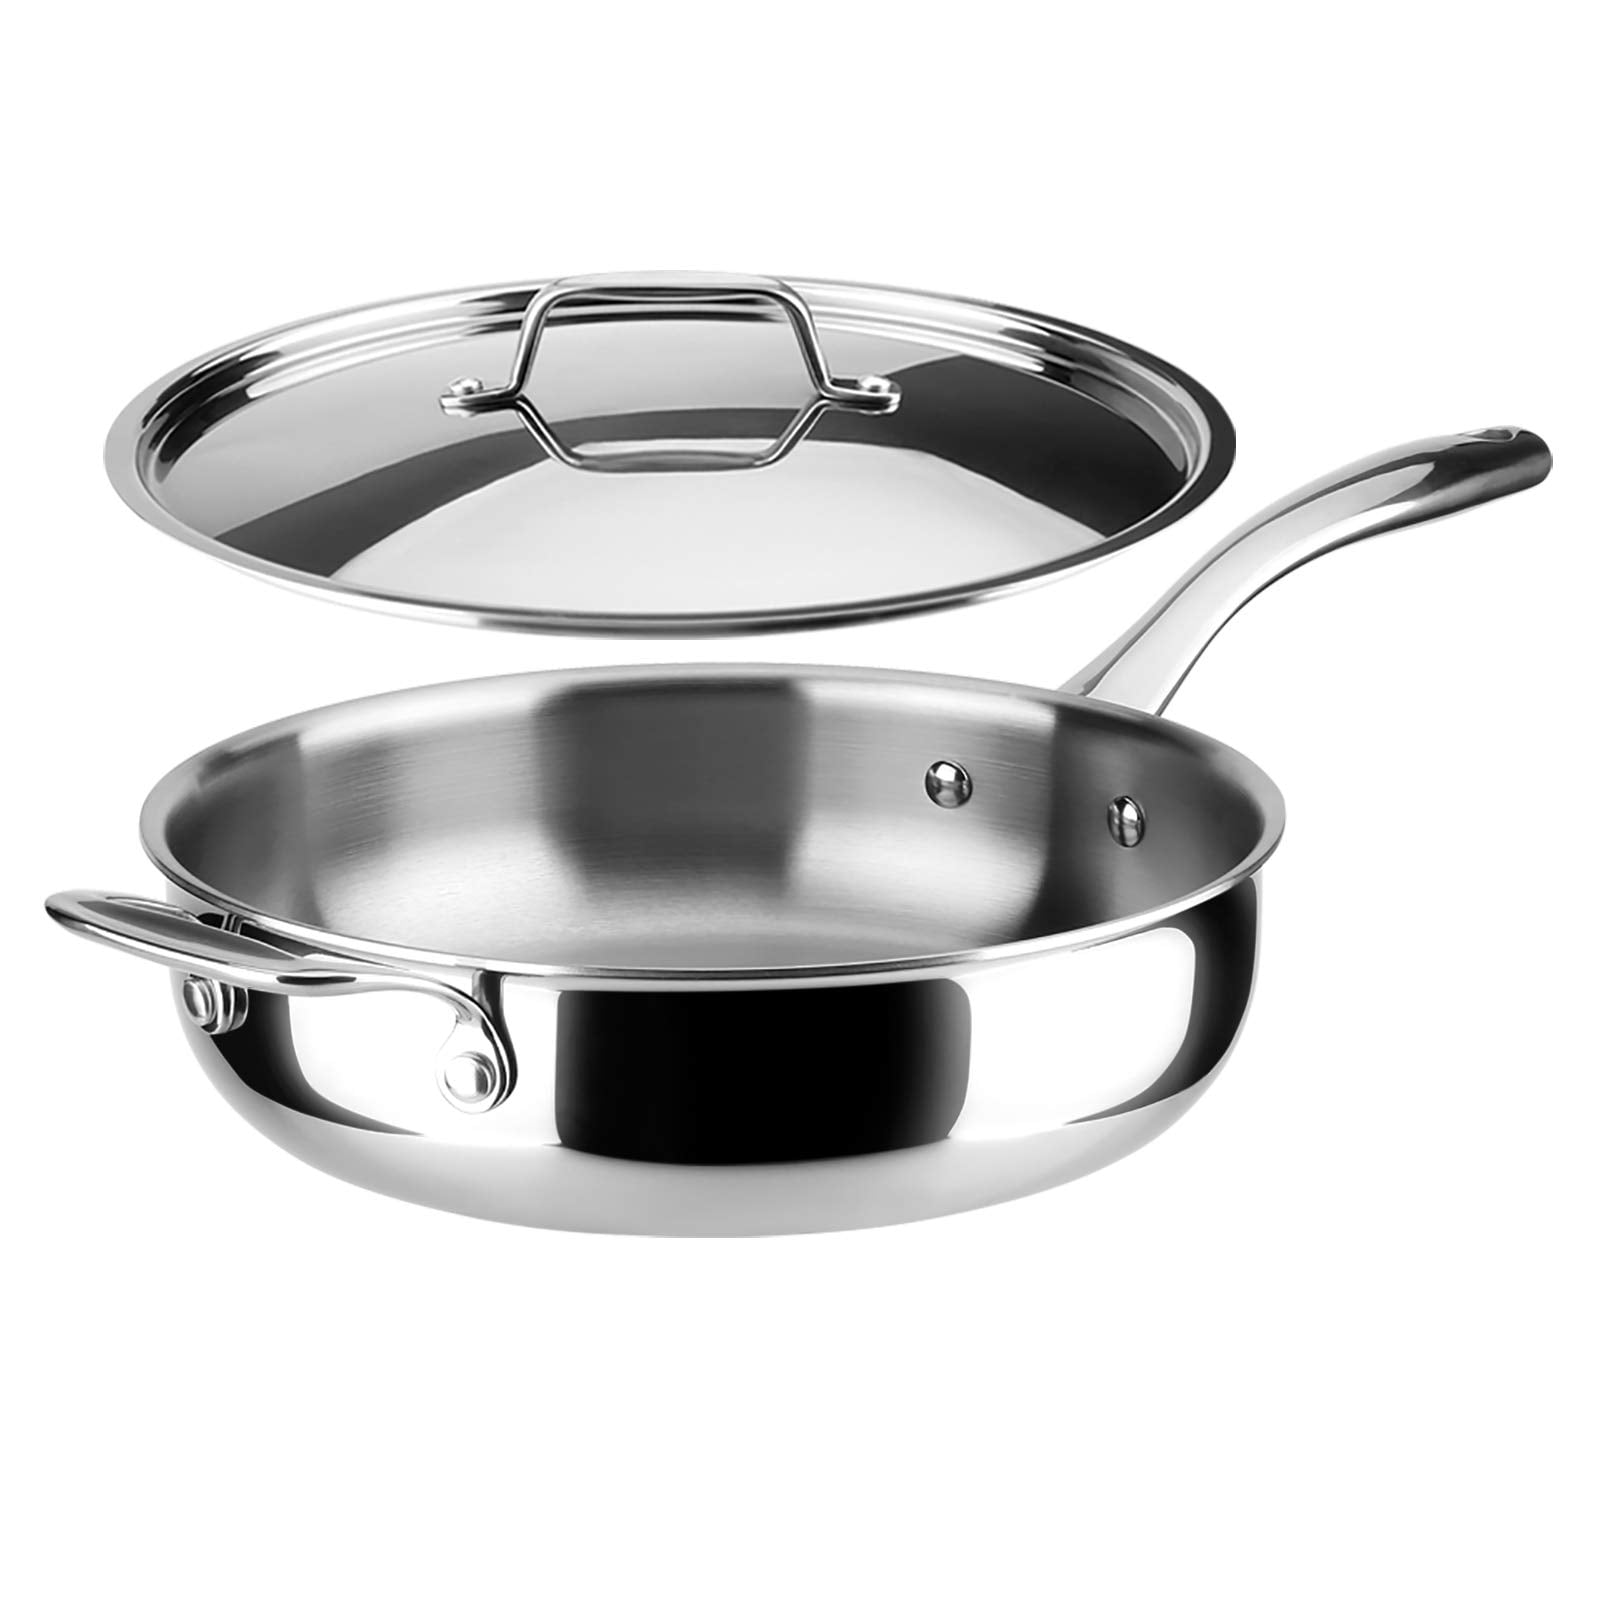 All-Clad Copper Core 3-Quart Saucepan with Loop and Lid + Reviews